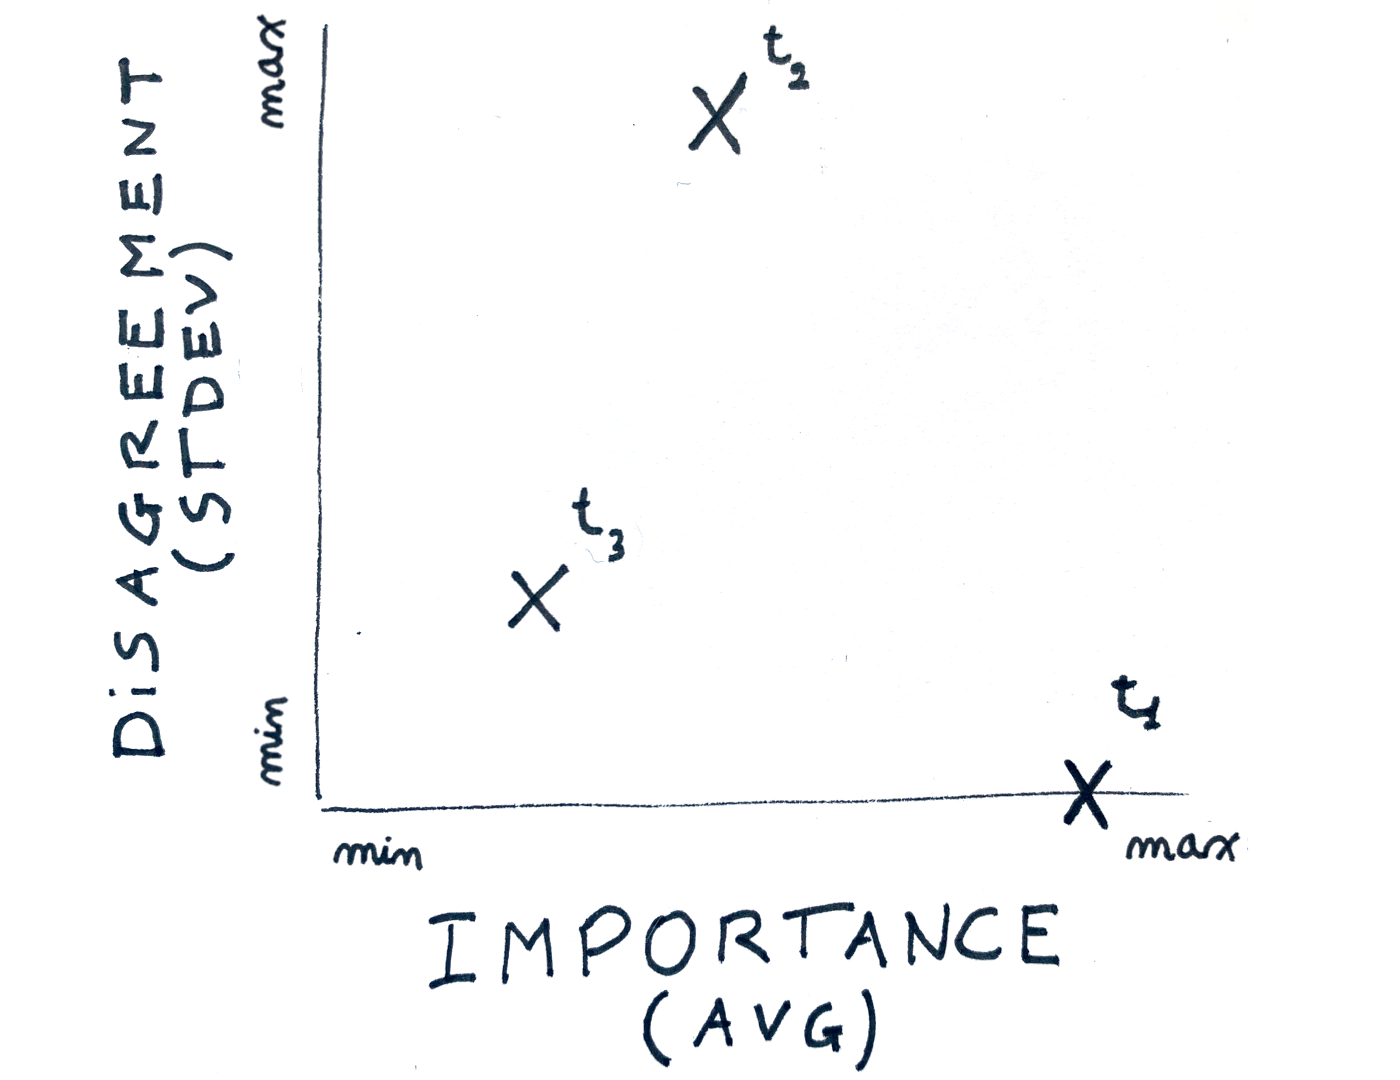 Sketch of a graph. On the left of the vertical axis the label "disagreement (stdev)". On the bottom of the horizontal axis the label "importance (avg)". The tree tasks mentioned above are represented as "x" in their respective positions.